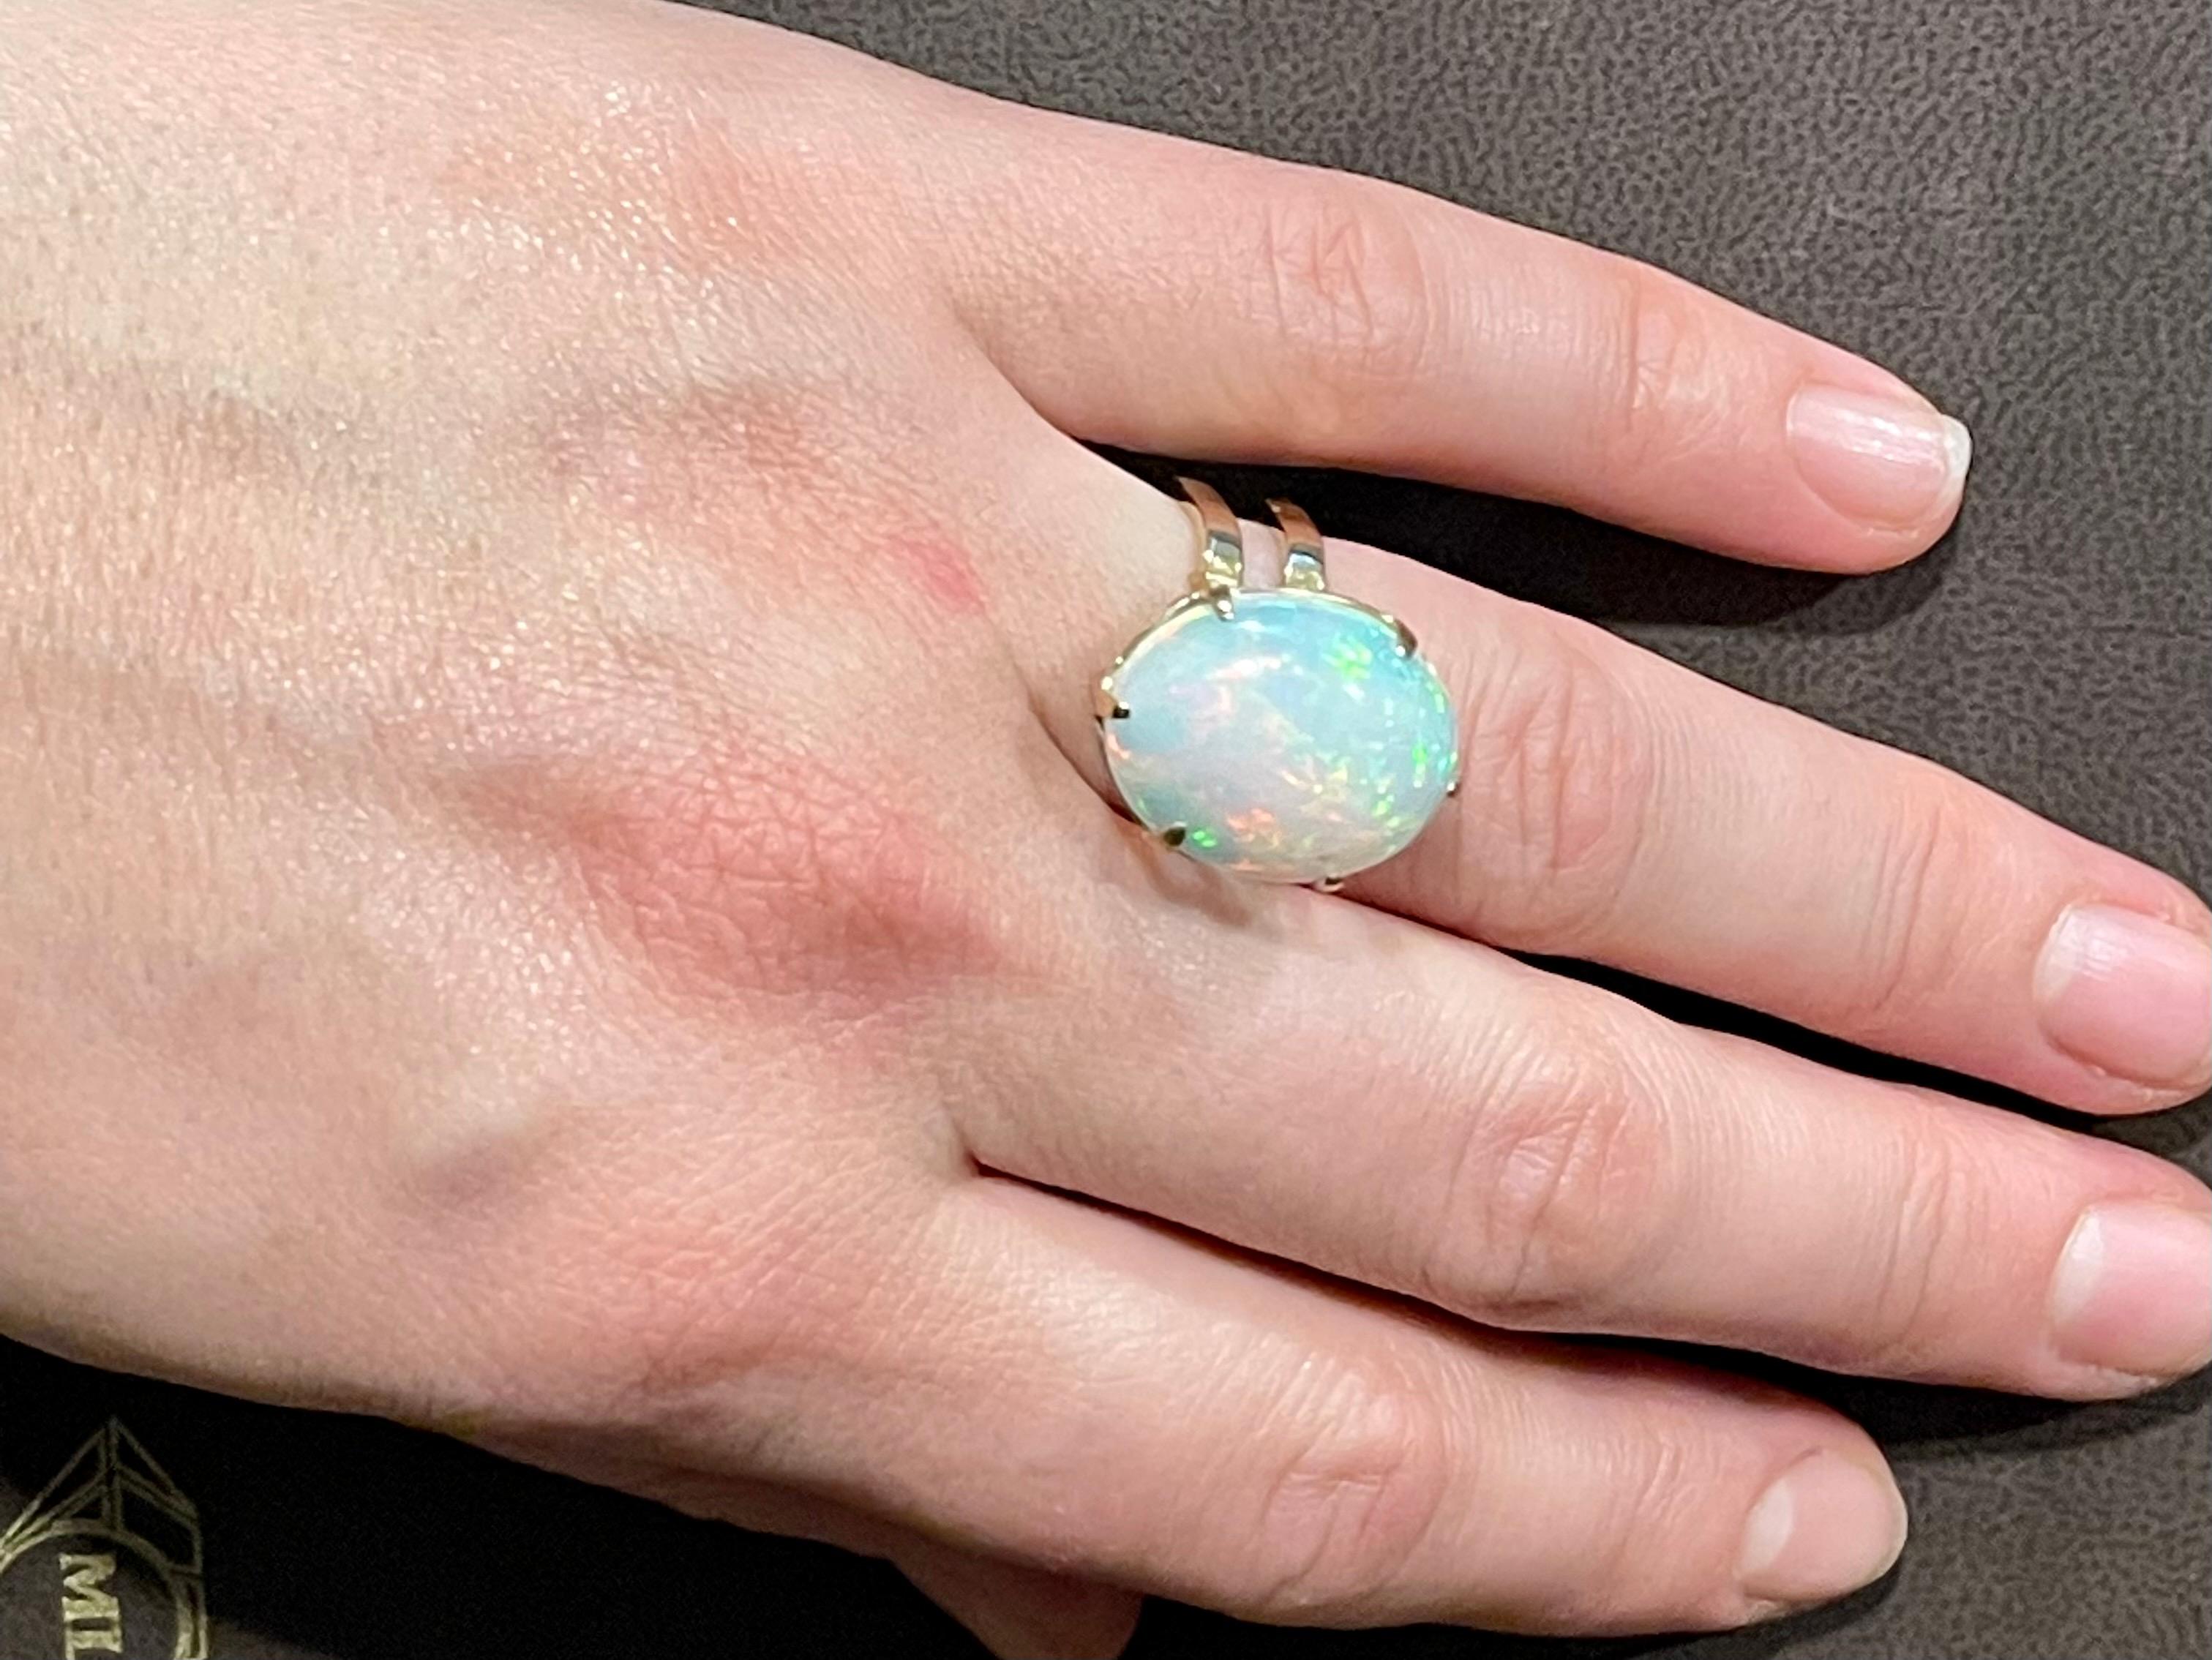 12 Carat Oval Shape Ethiopian Opal Cocktail Ring 14 Karat Yellow Gold For Sale 5